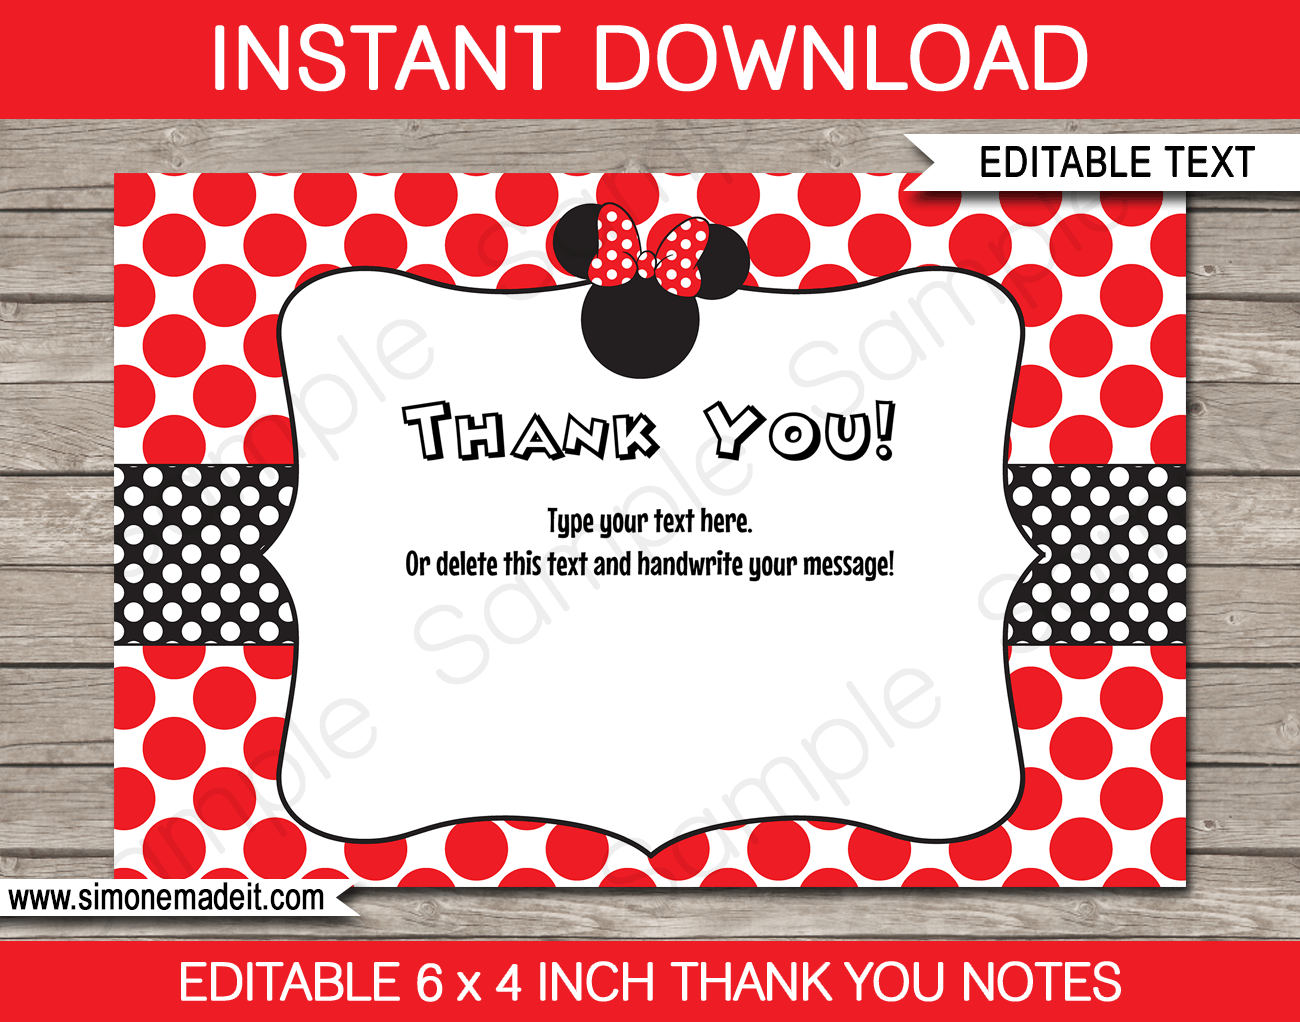 Red Printable Minnie Mouse Birthday Party Thank You Cards Template - with Editable Text - Instant Download via simonemadeit.com